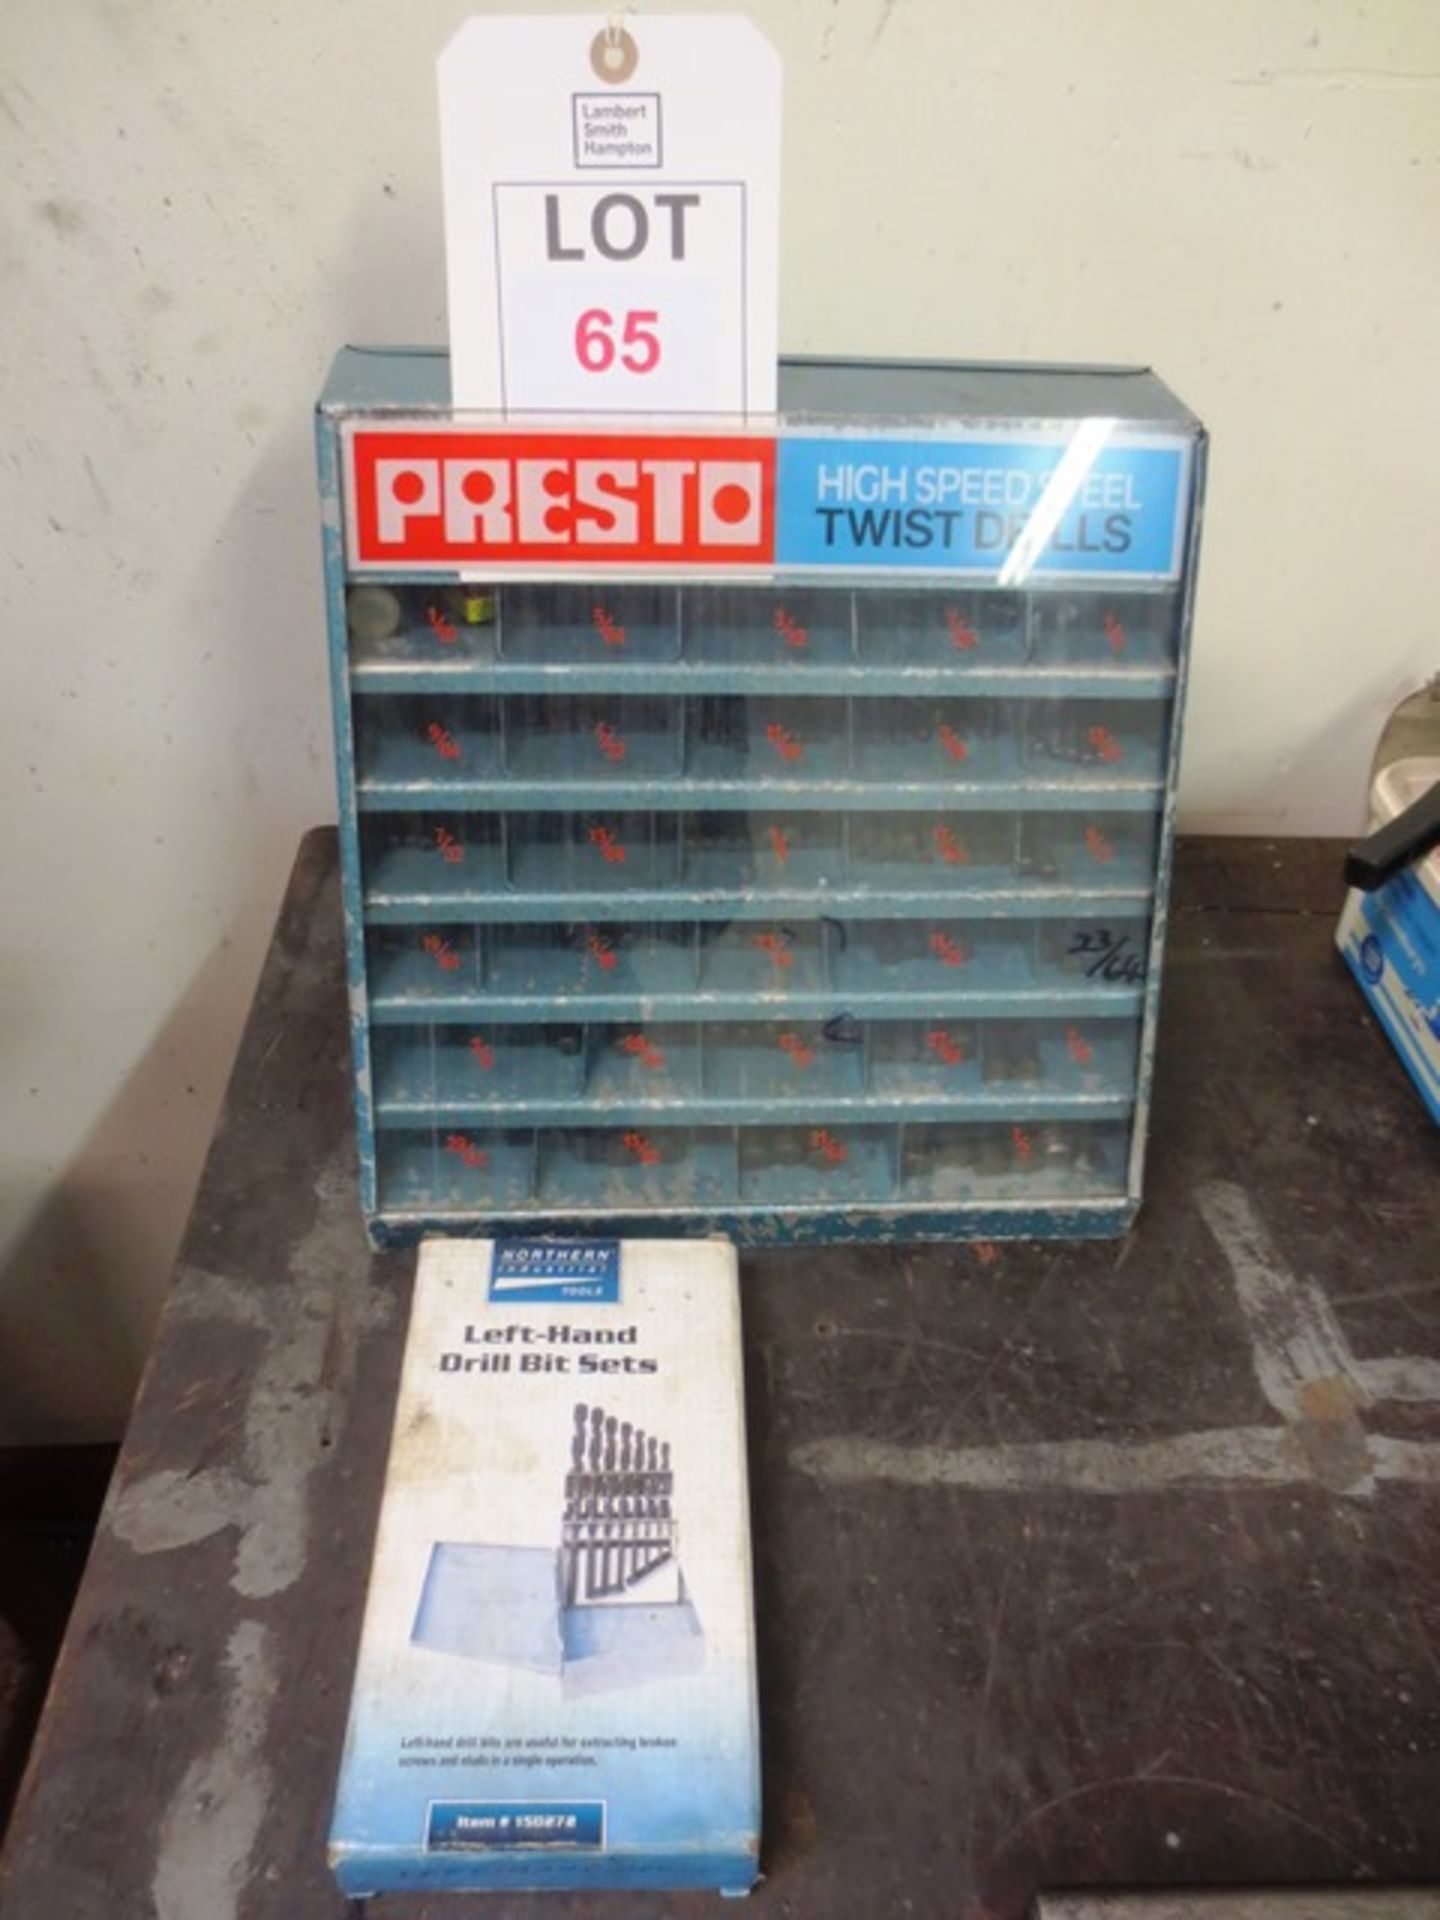 Presto high speed twist drill bits, and display rack with Northern Industrial left hand drill bit